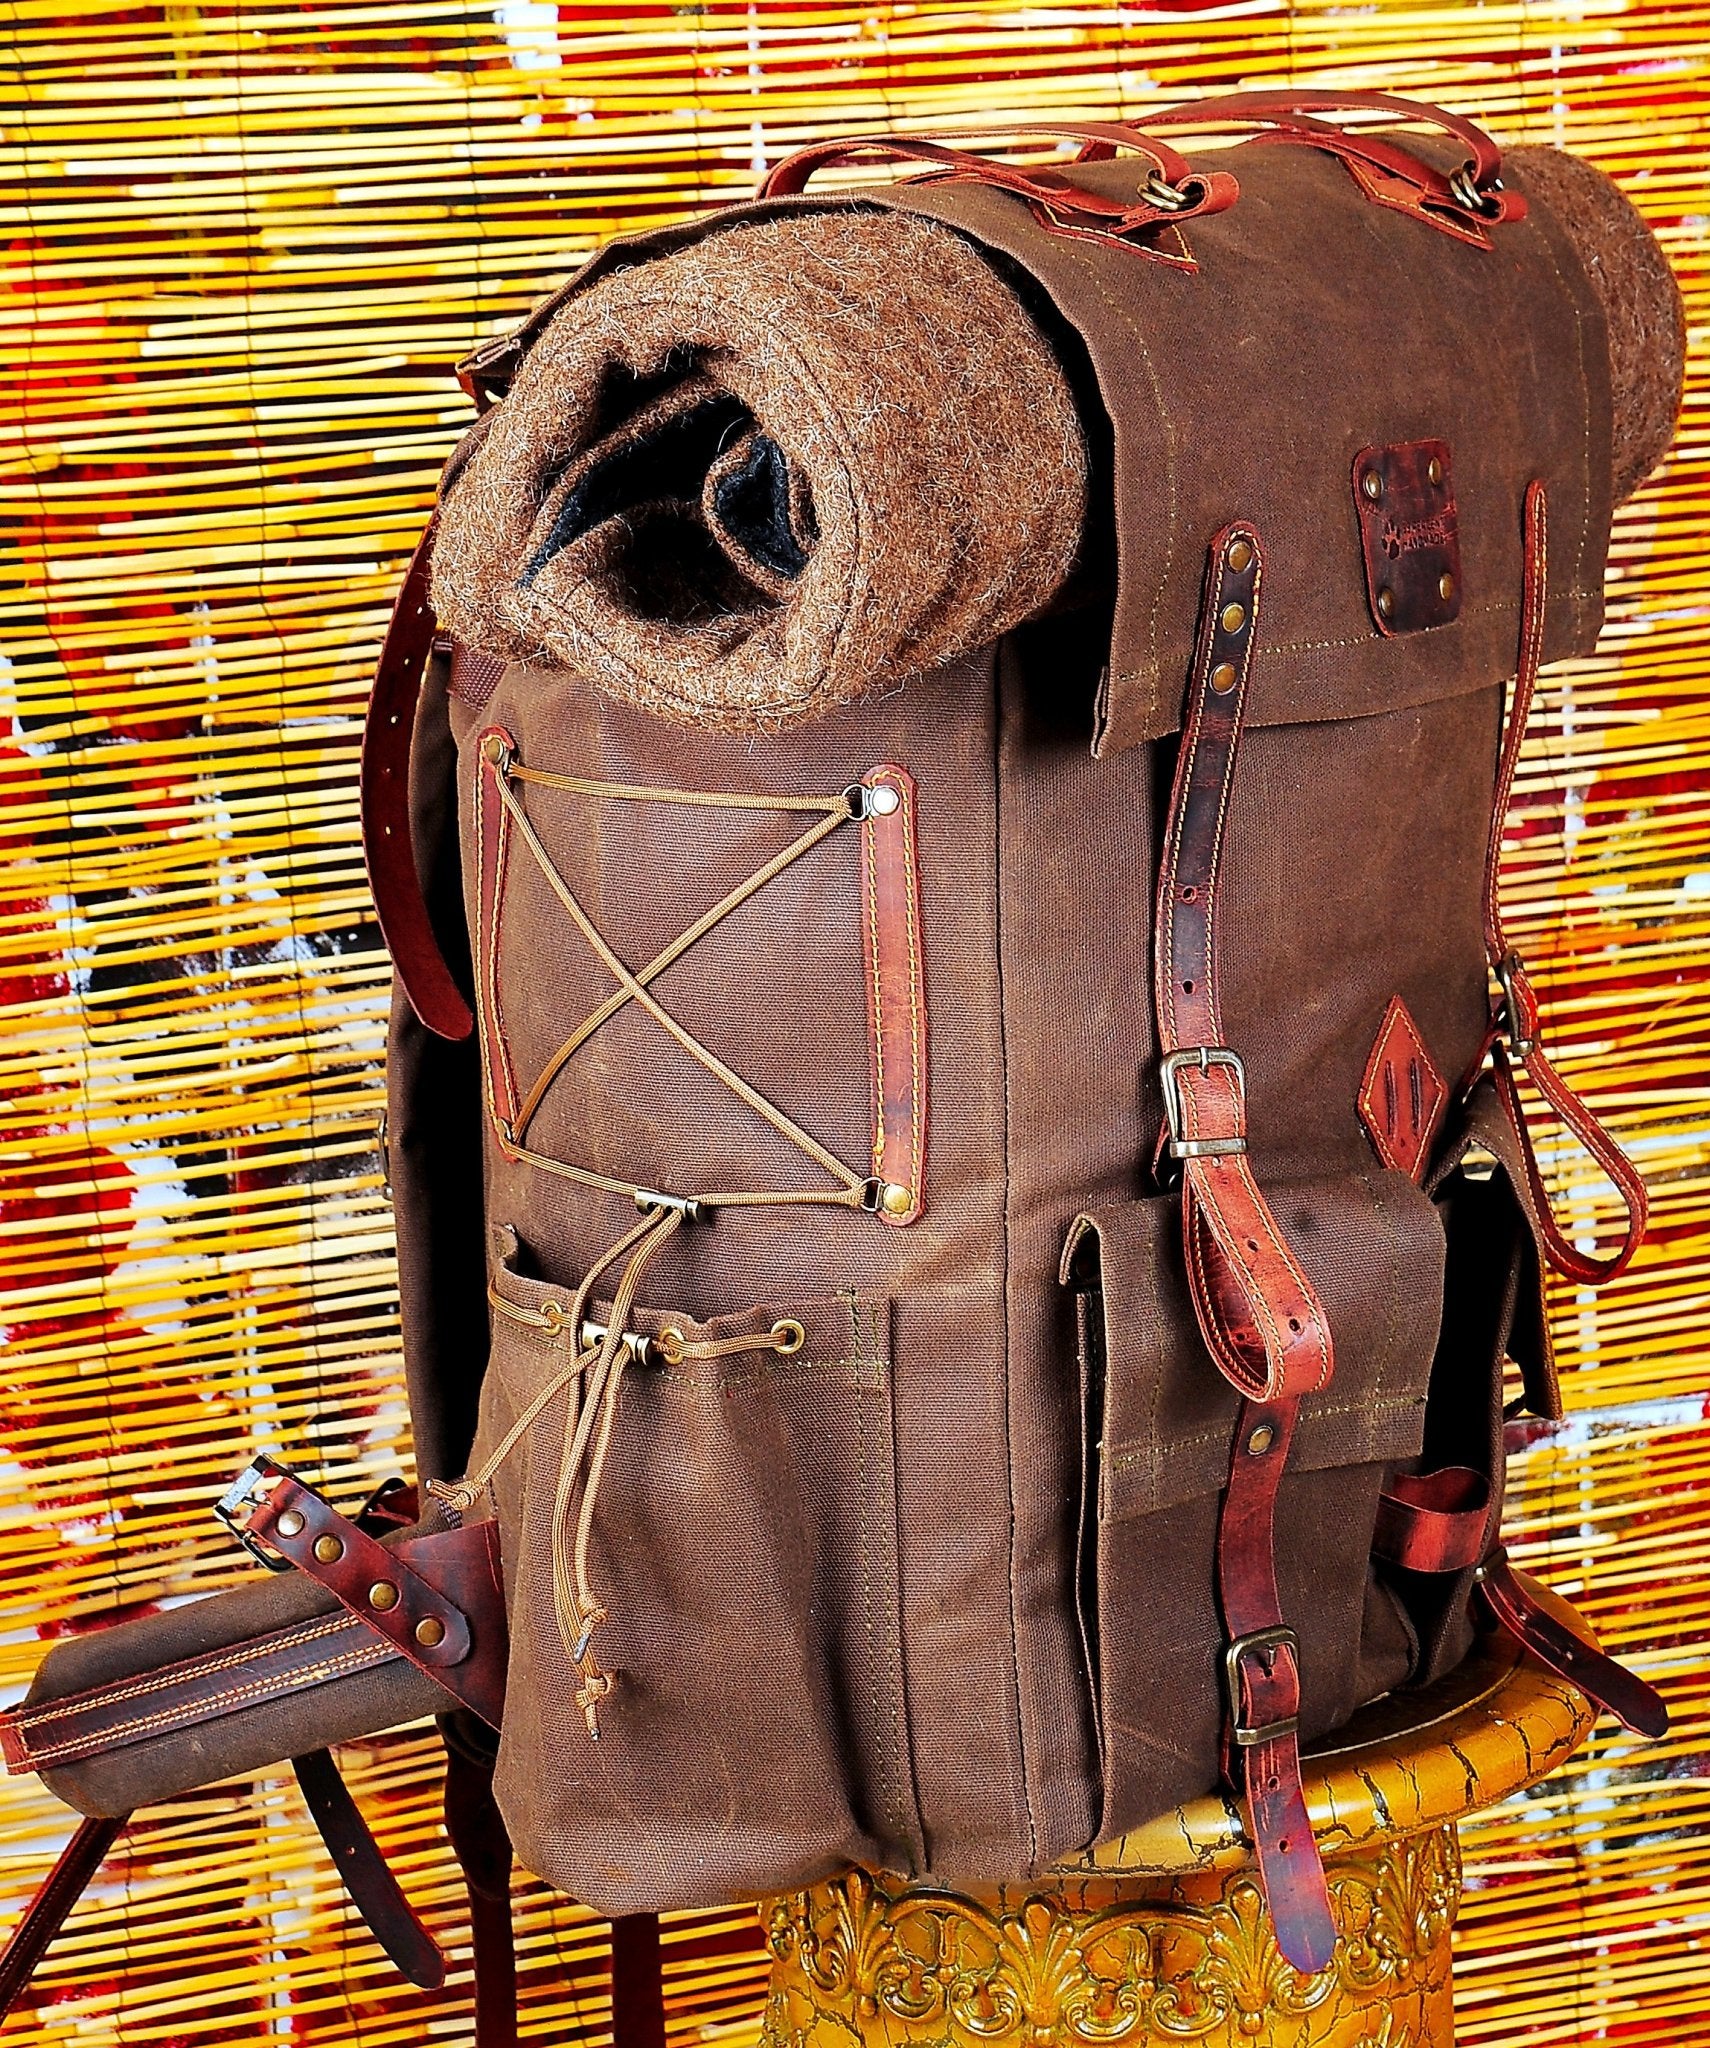 30L to 50L | Bushcraft Backpack | Brown, Green, Dhaki Colours | Handmade  Leather, Waxed Canvas Backpack for Travel-Camping | Personalization